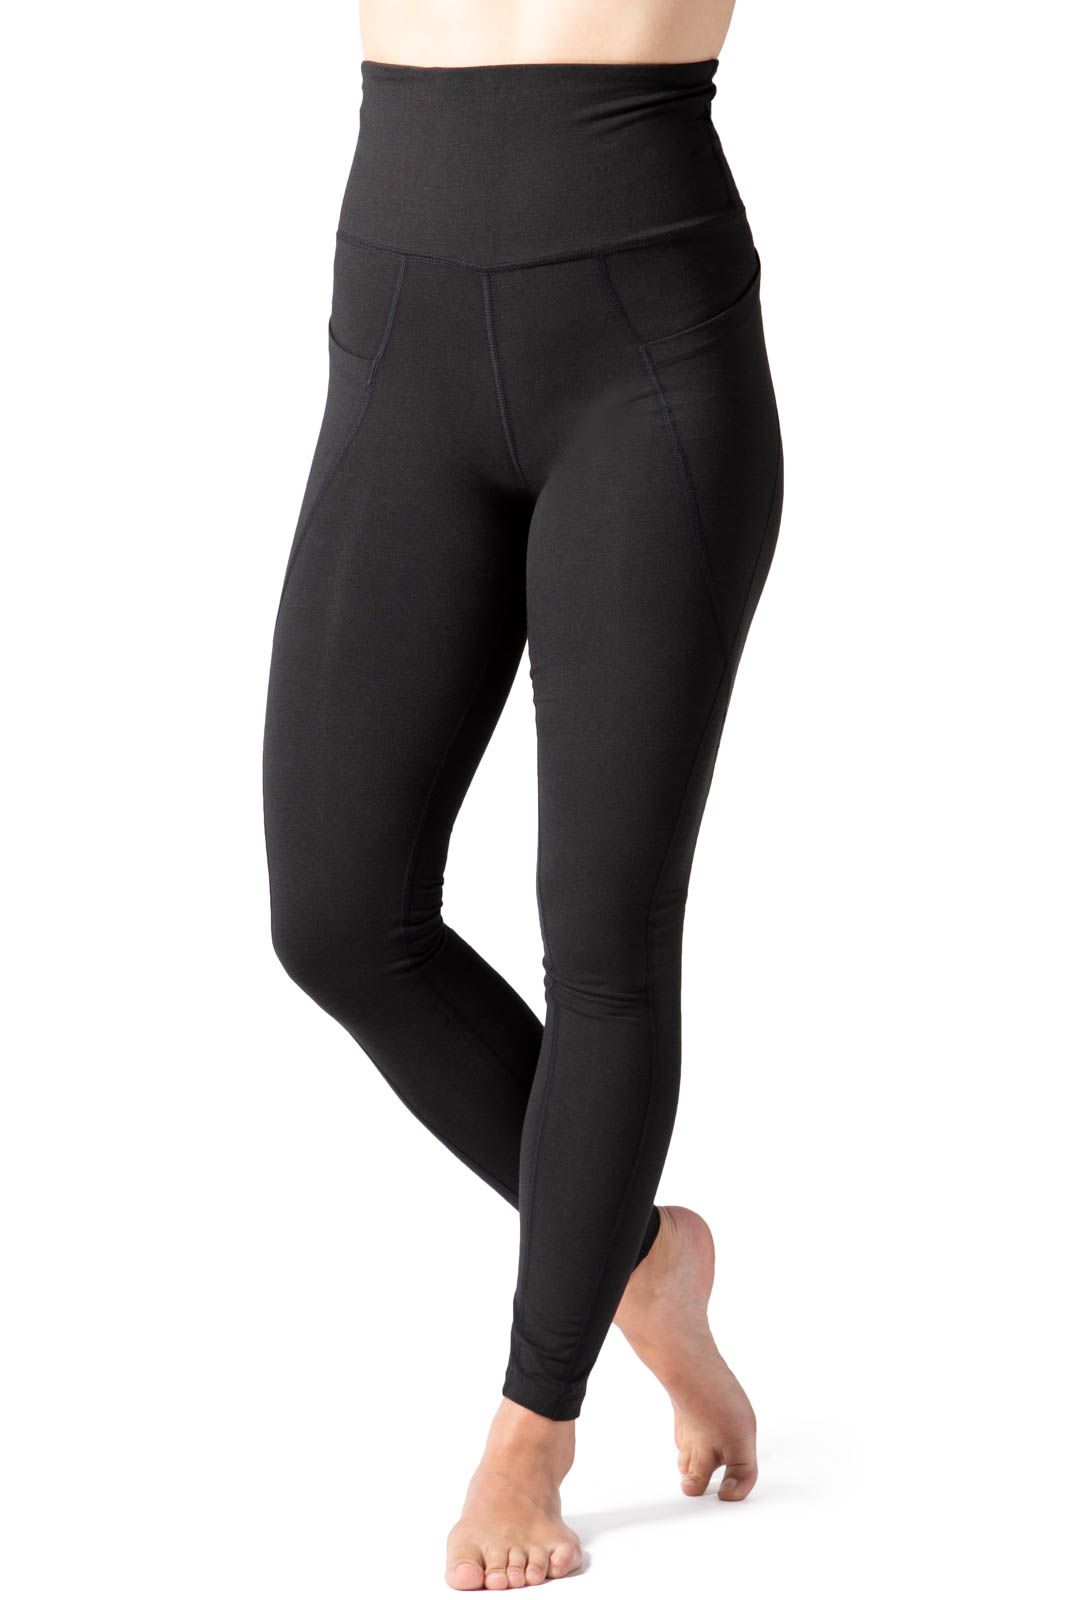 Women's EcoFabric™ Super High-Rise Active Legging Tight Womens>Activewear>Yoga Pants Fishers Finery Black X-Small 